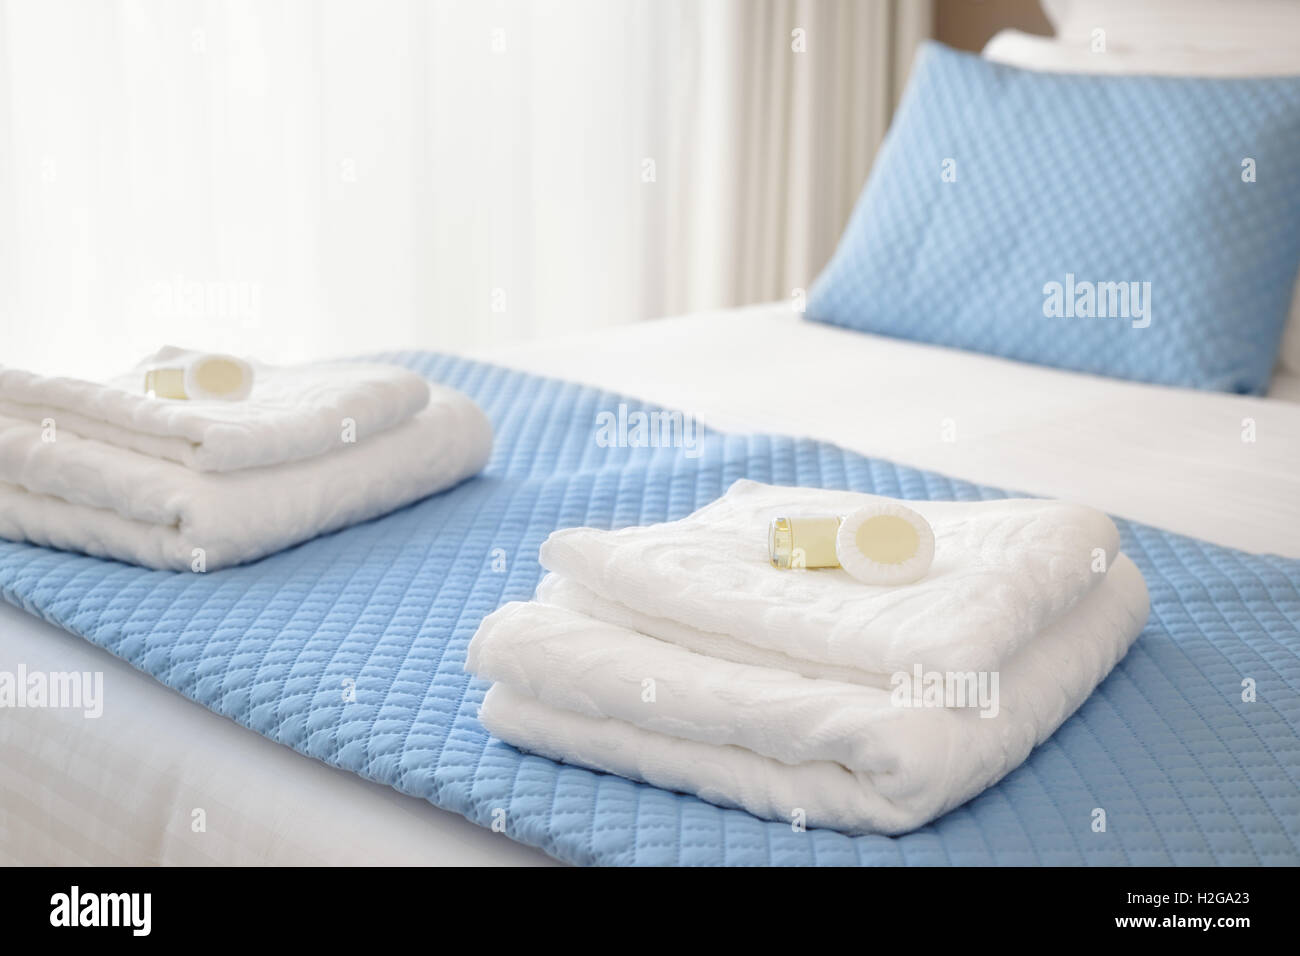 Bed with fresh towels and amenities Stock Photo